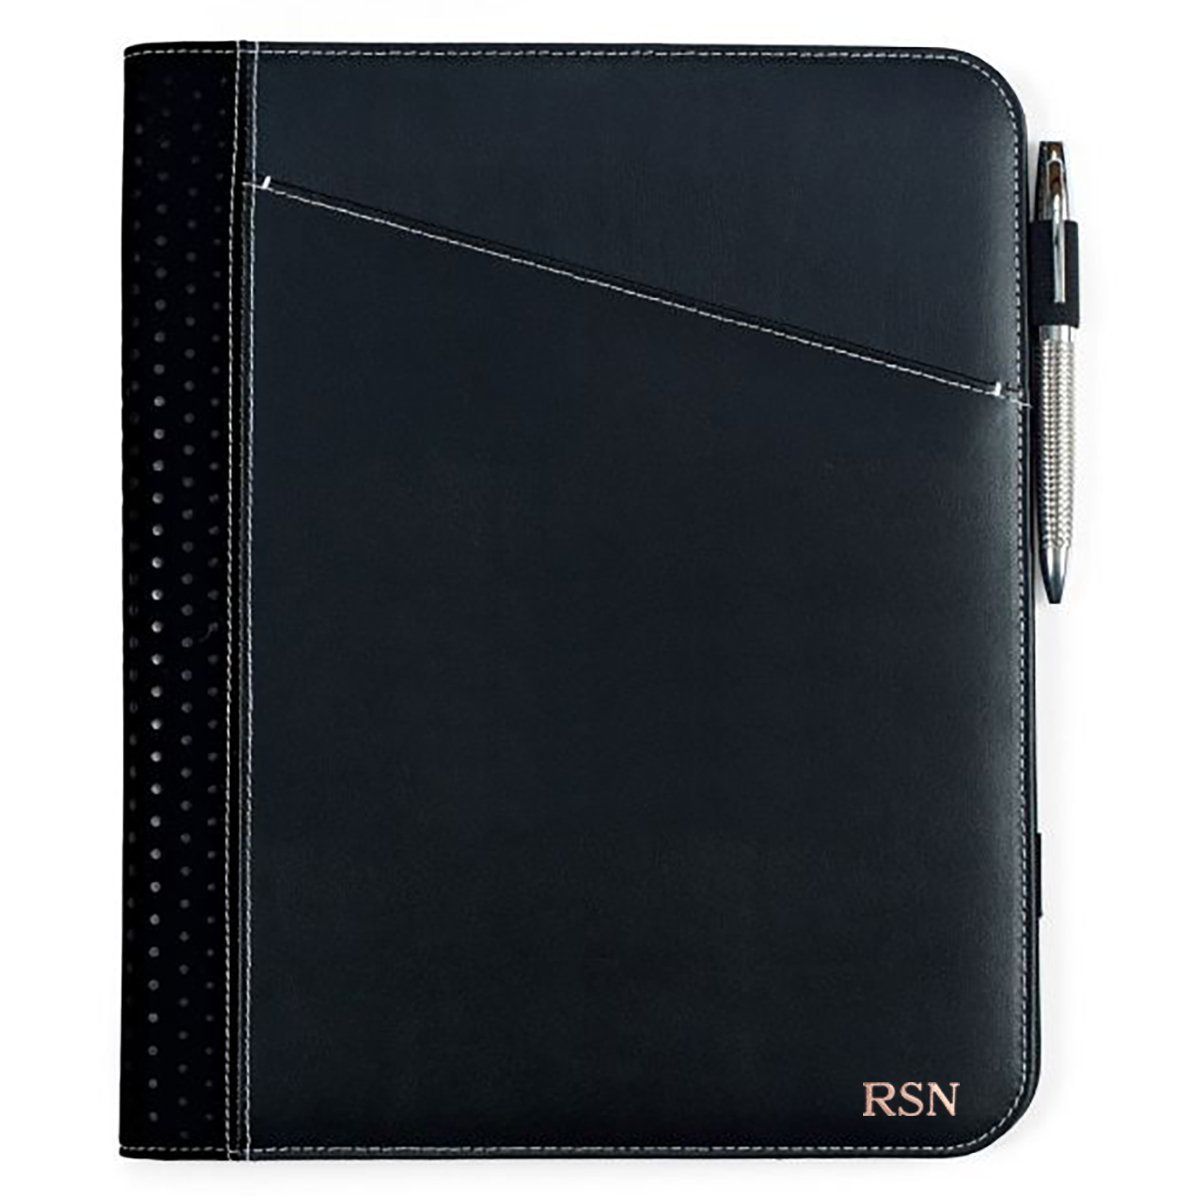 American Made Corporate Gifts – Twin Saints Leather